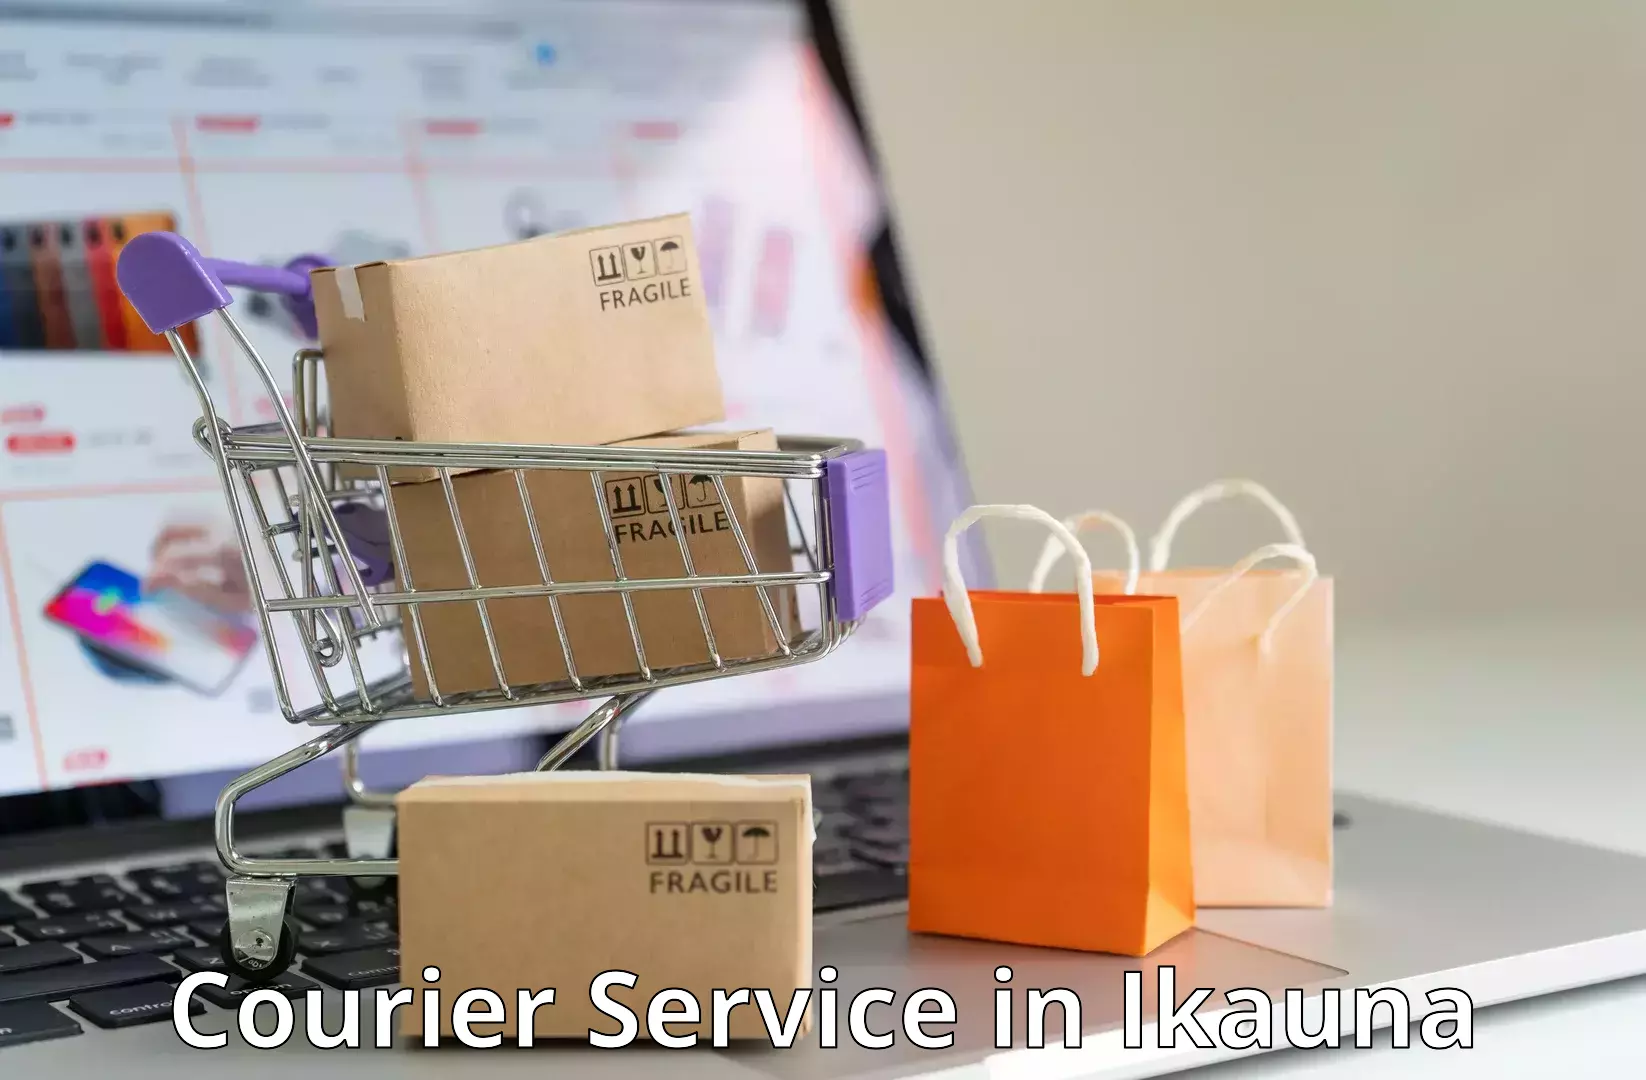 24-hour courier services in Ikauna